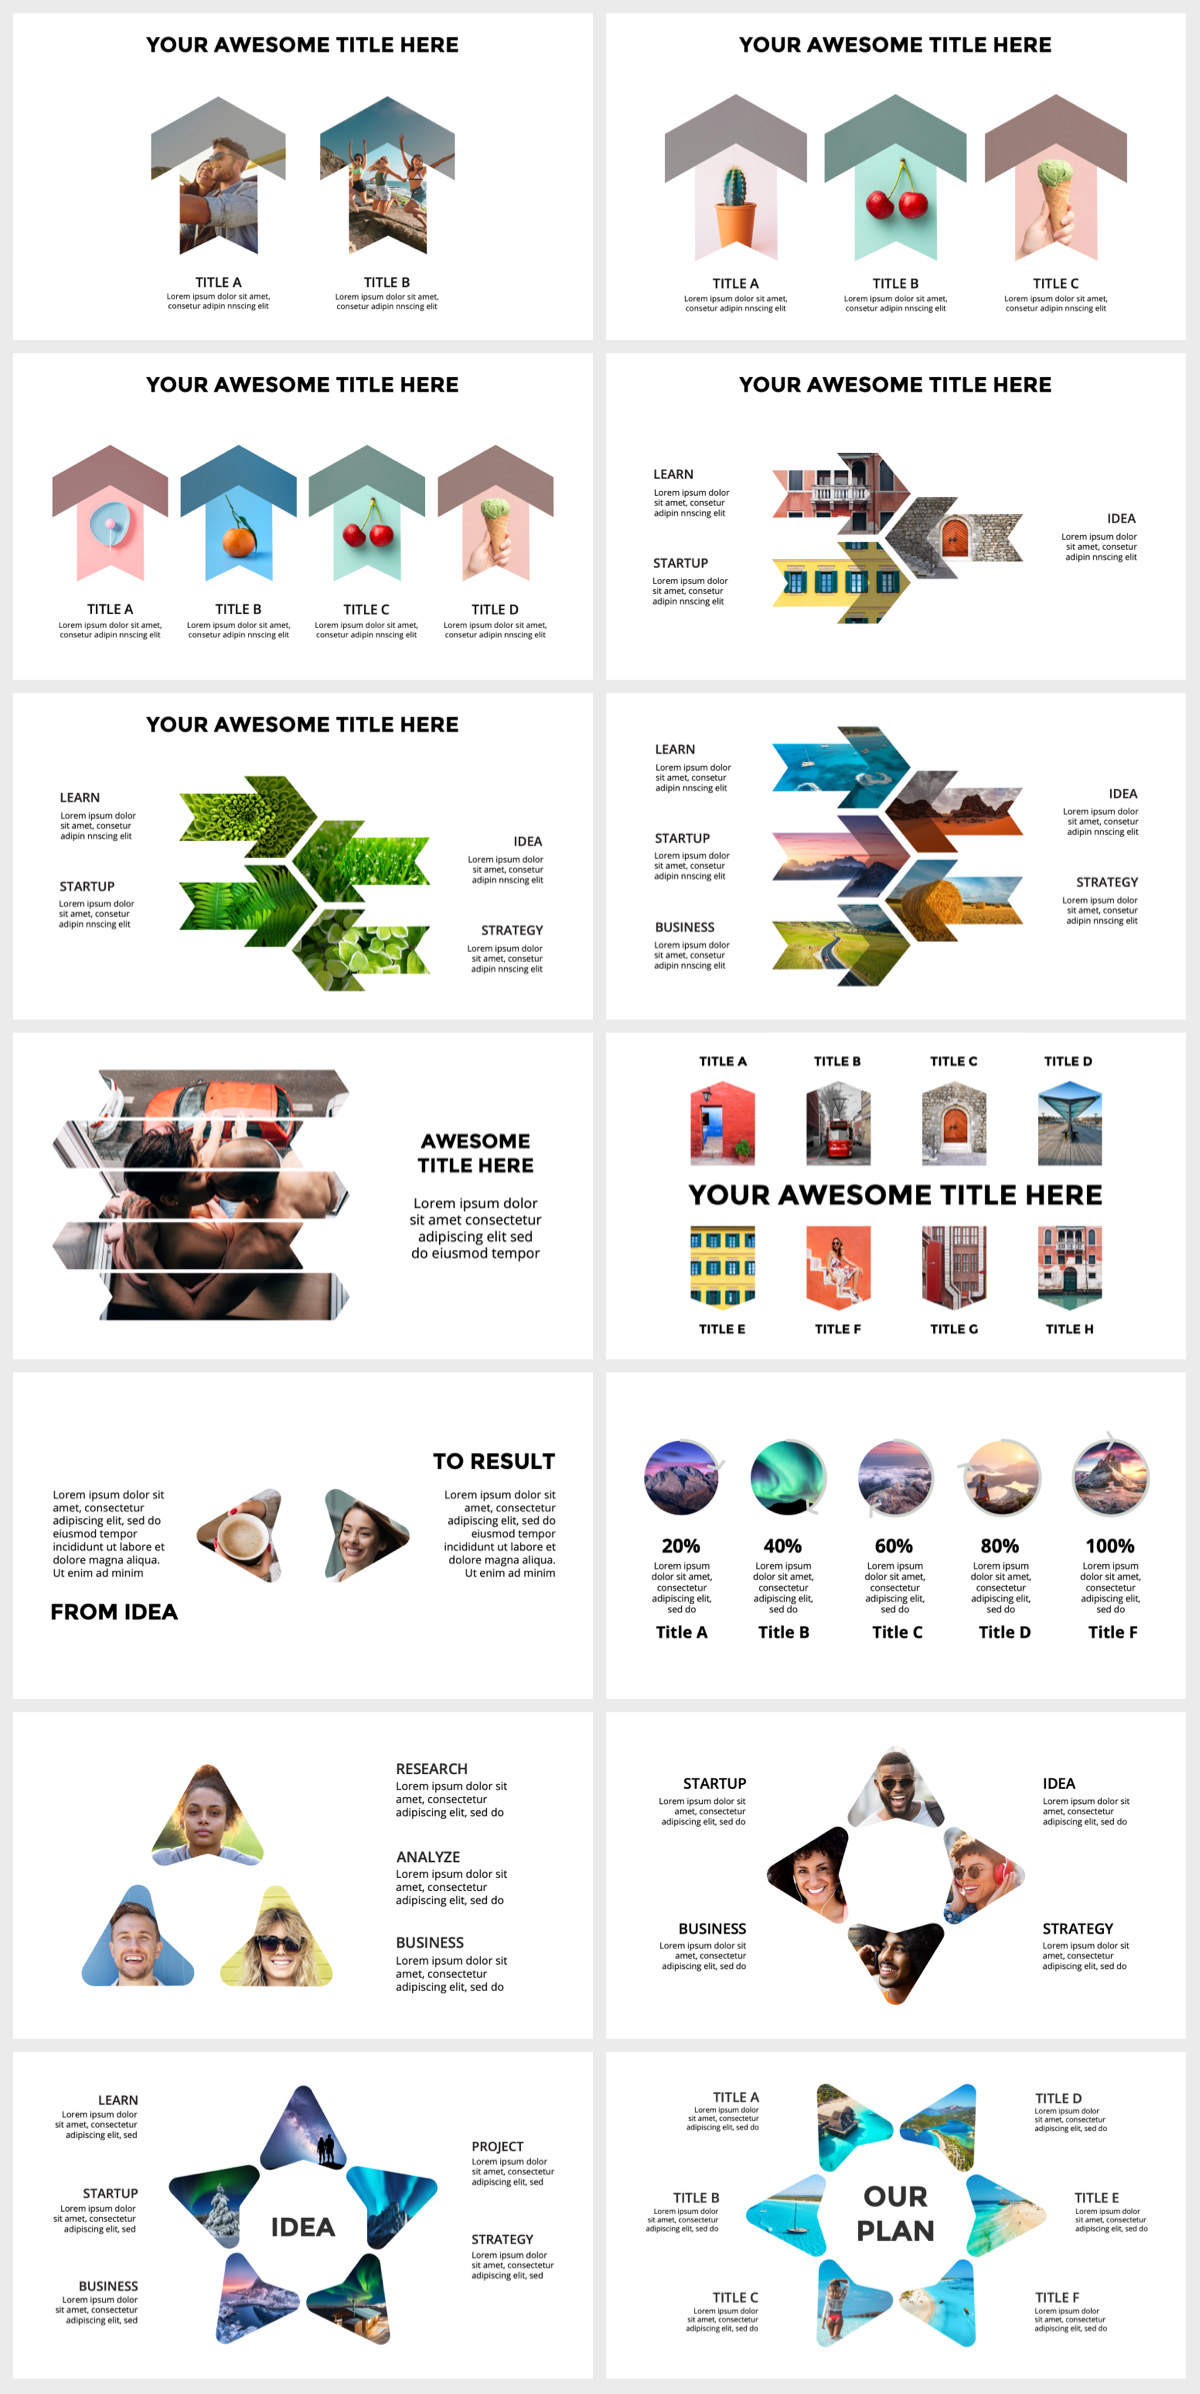 Wowly - 3500 Infographics & Presentation Templates! Updated! PowerPoint Canva Figma Sketch Ai Psd. - 247